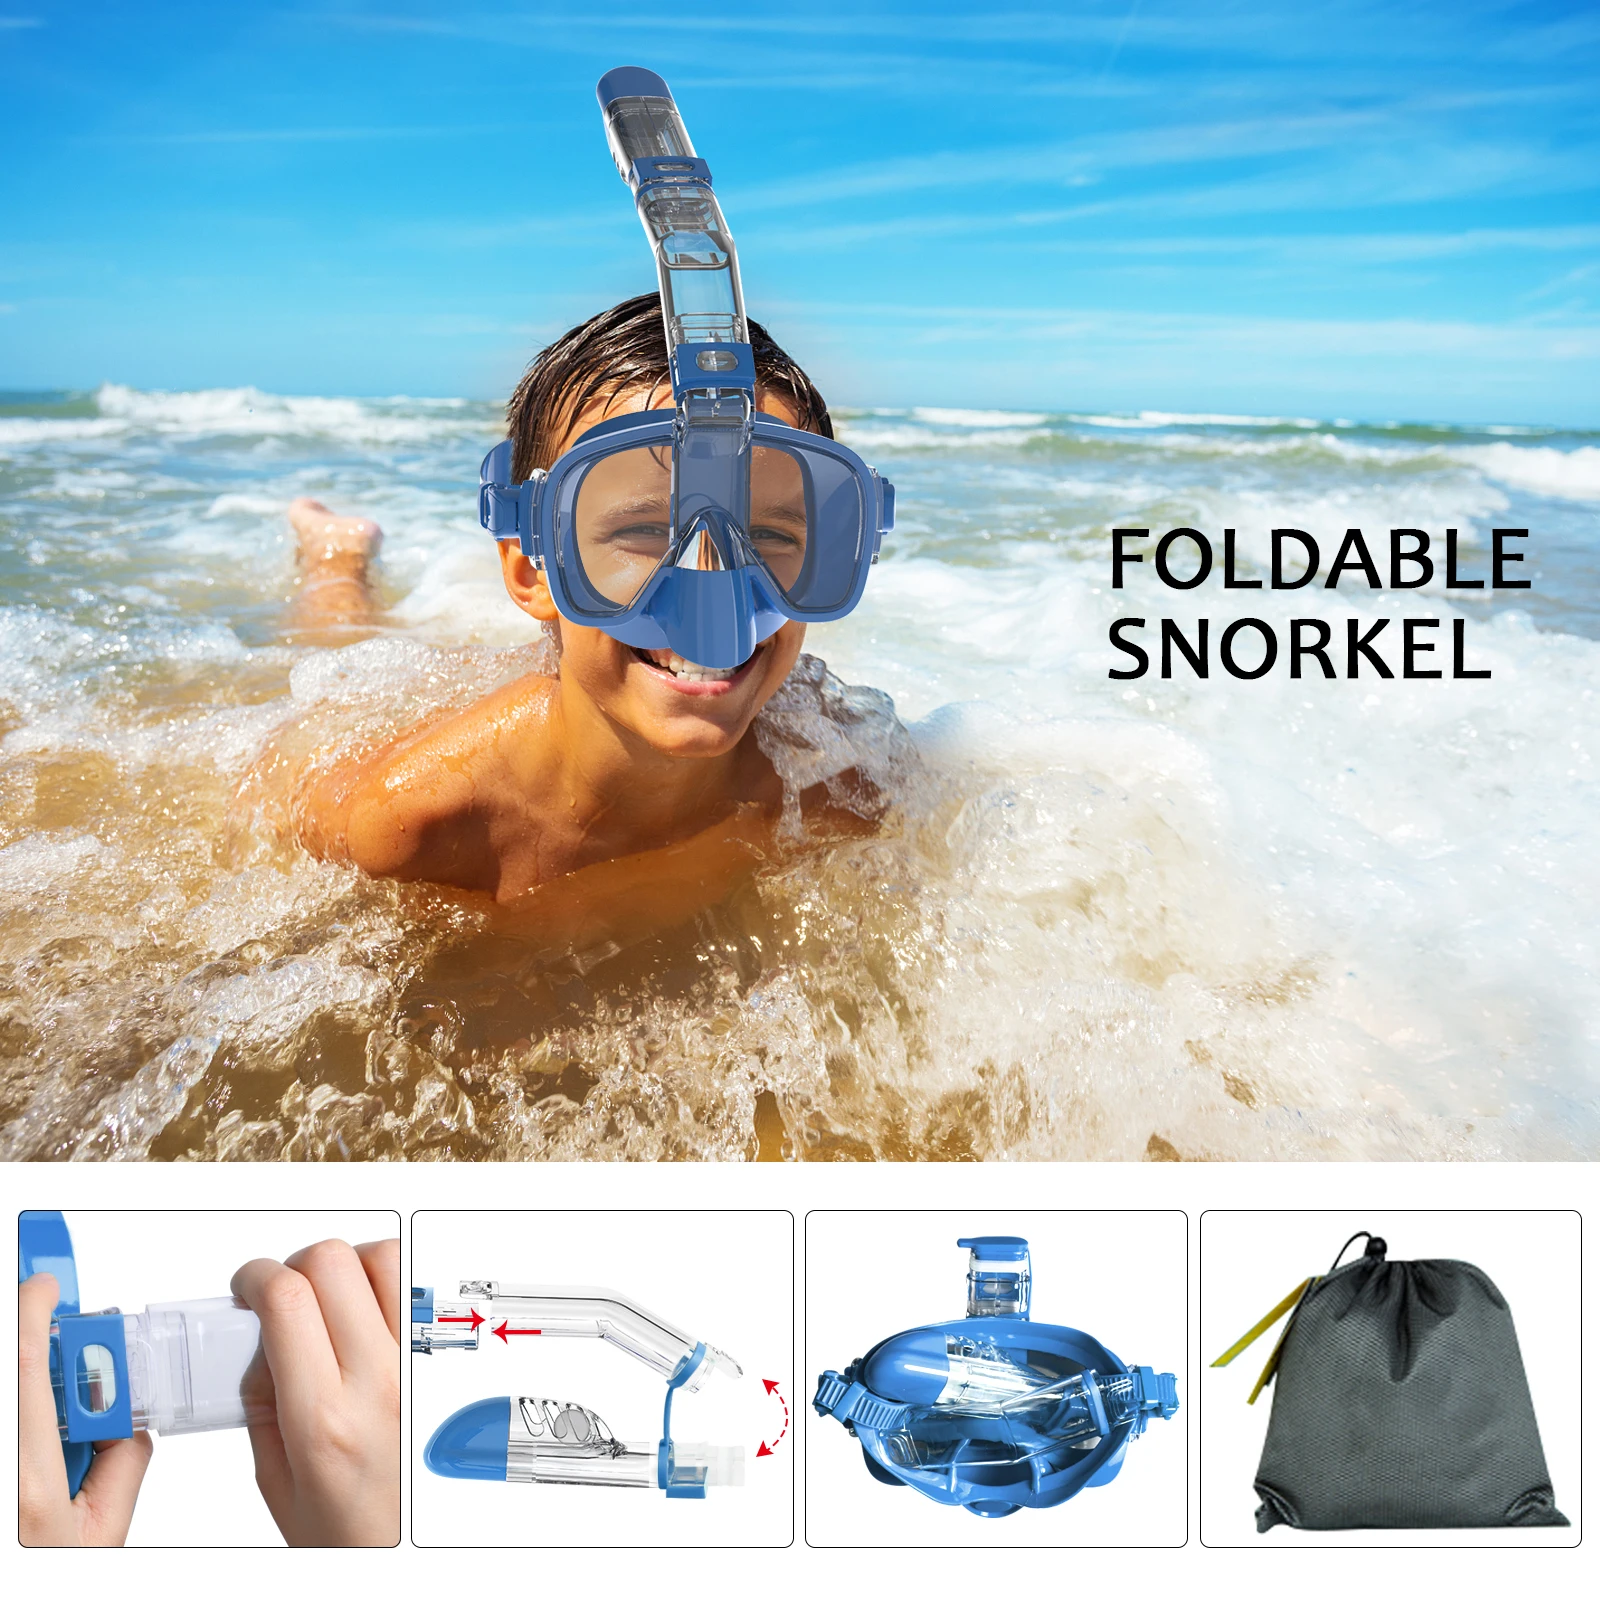 Factory direct sale cheap price 2 in 1 diving set 180 degree view half face scuba snorkel diving mask for kids adults